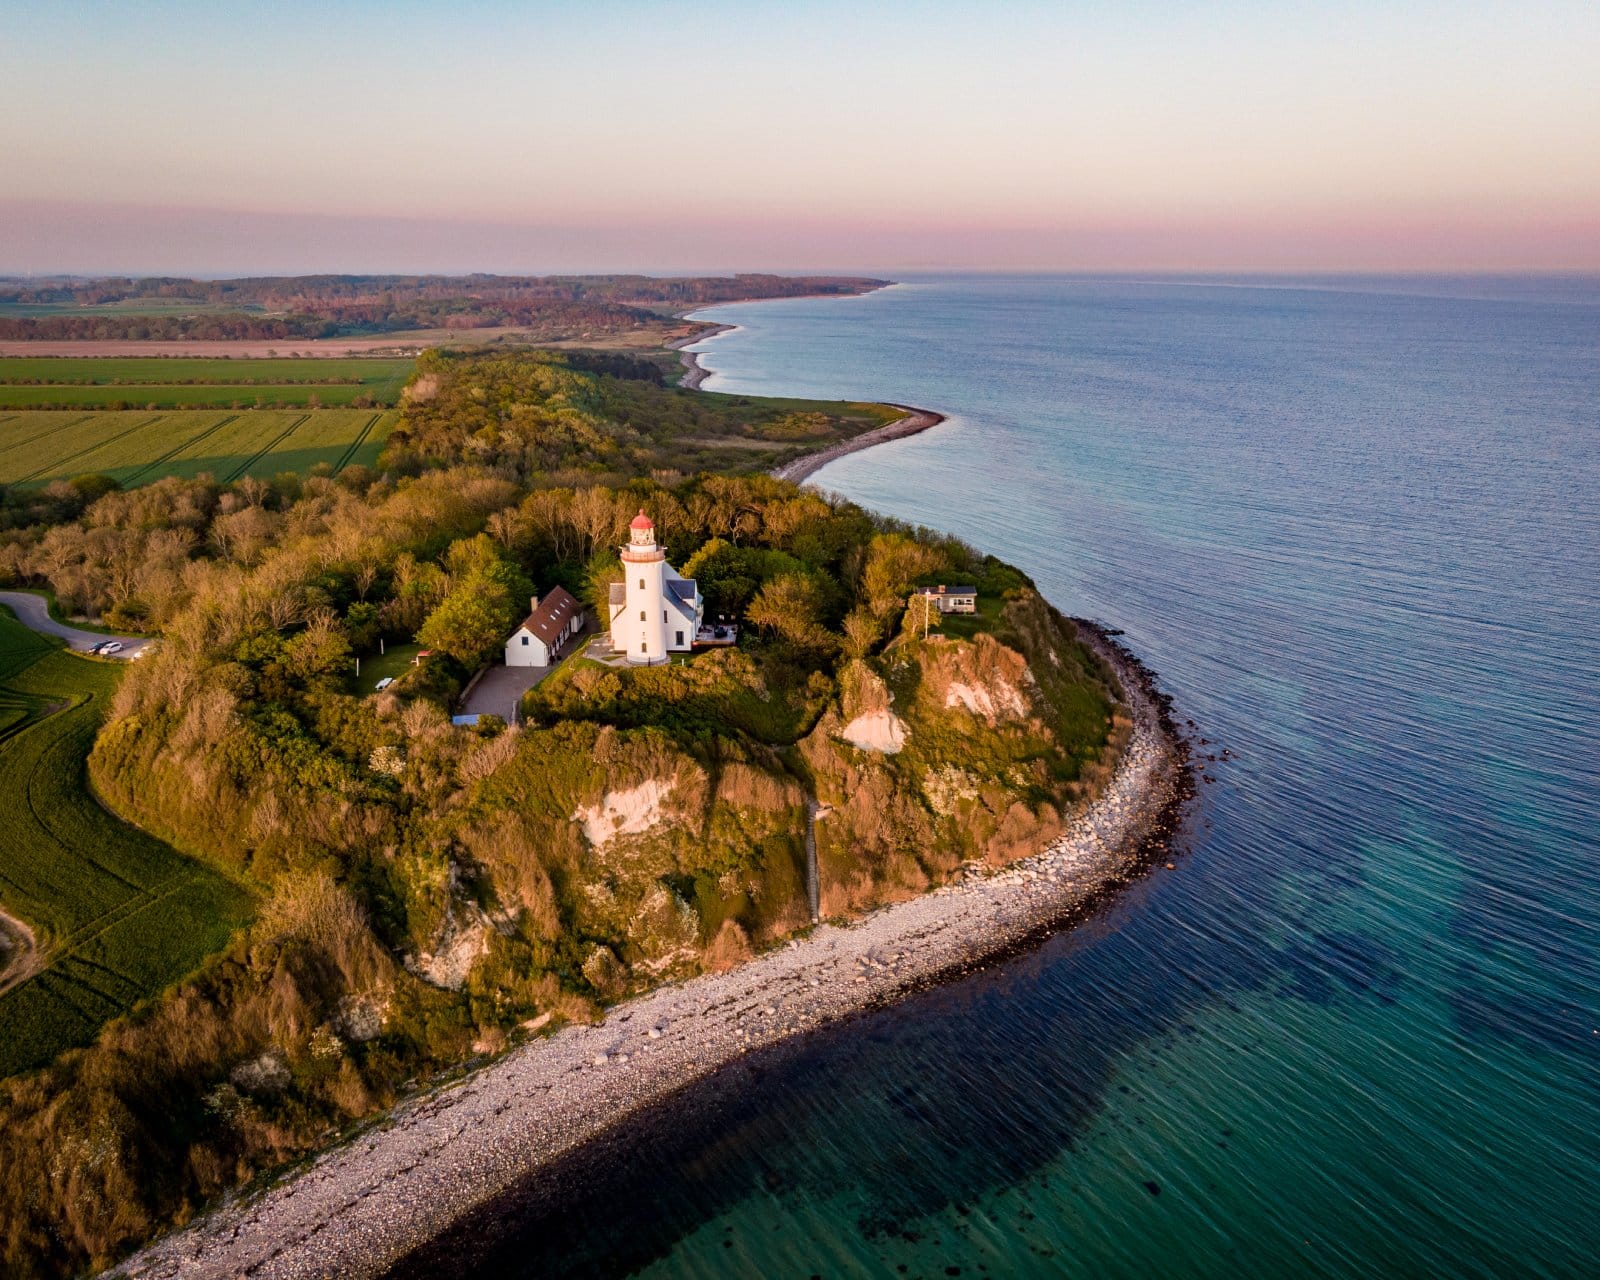 <p class="wp-caption-text">Image Credit: Shutterstock / Rasmus Kleis</p>  <p><span>Samso, an island in the Kattegat Sea, is renowned as Denmark’s renewable energy island, achieving carbon-negative status through wind, biomass, and solar power. The island’s sustainable model extends to organic farming, green transportation, and eco-friendly tourism, with opportunities for visitors to learn about renewable energy, enjoy locally sourced meals, and explore the island’s natural and cultural sites by bike or on foot.</span></p>